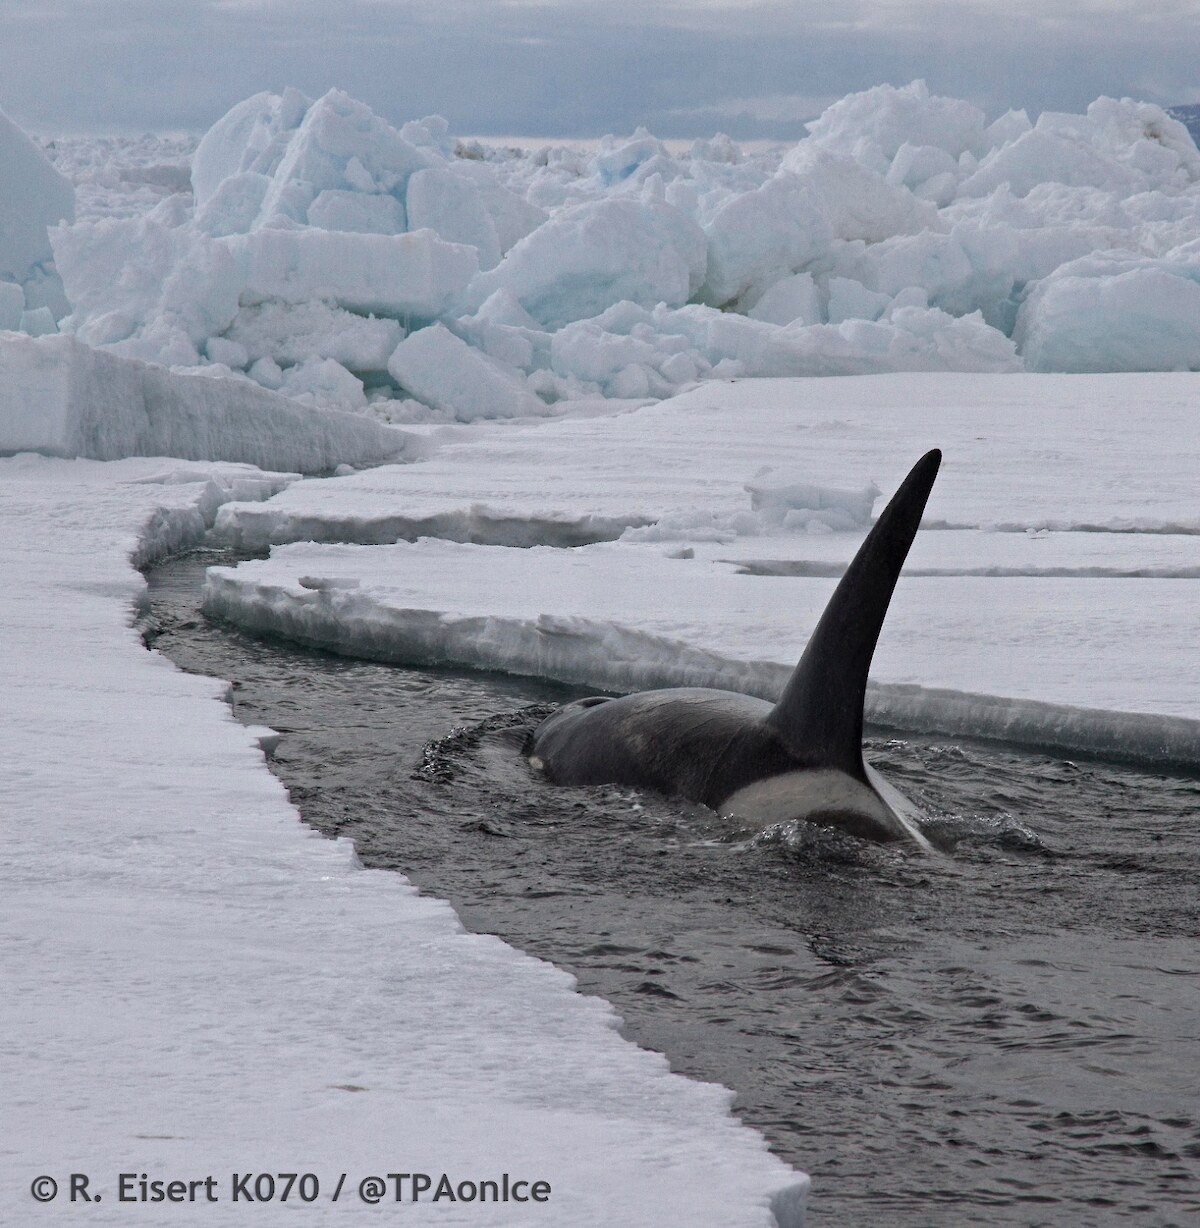 The Ross Sea region is home to a distinctive type of kākahi (killer whale) that hunts toothfish and skilfully navigates through sea ice.